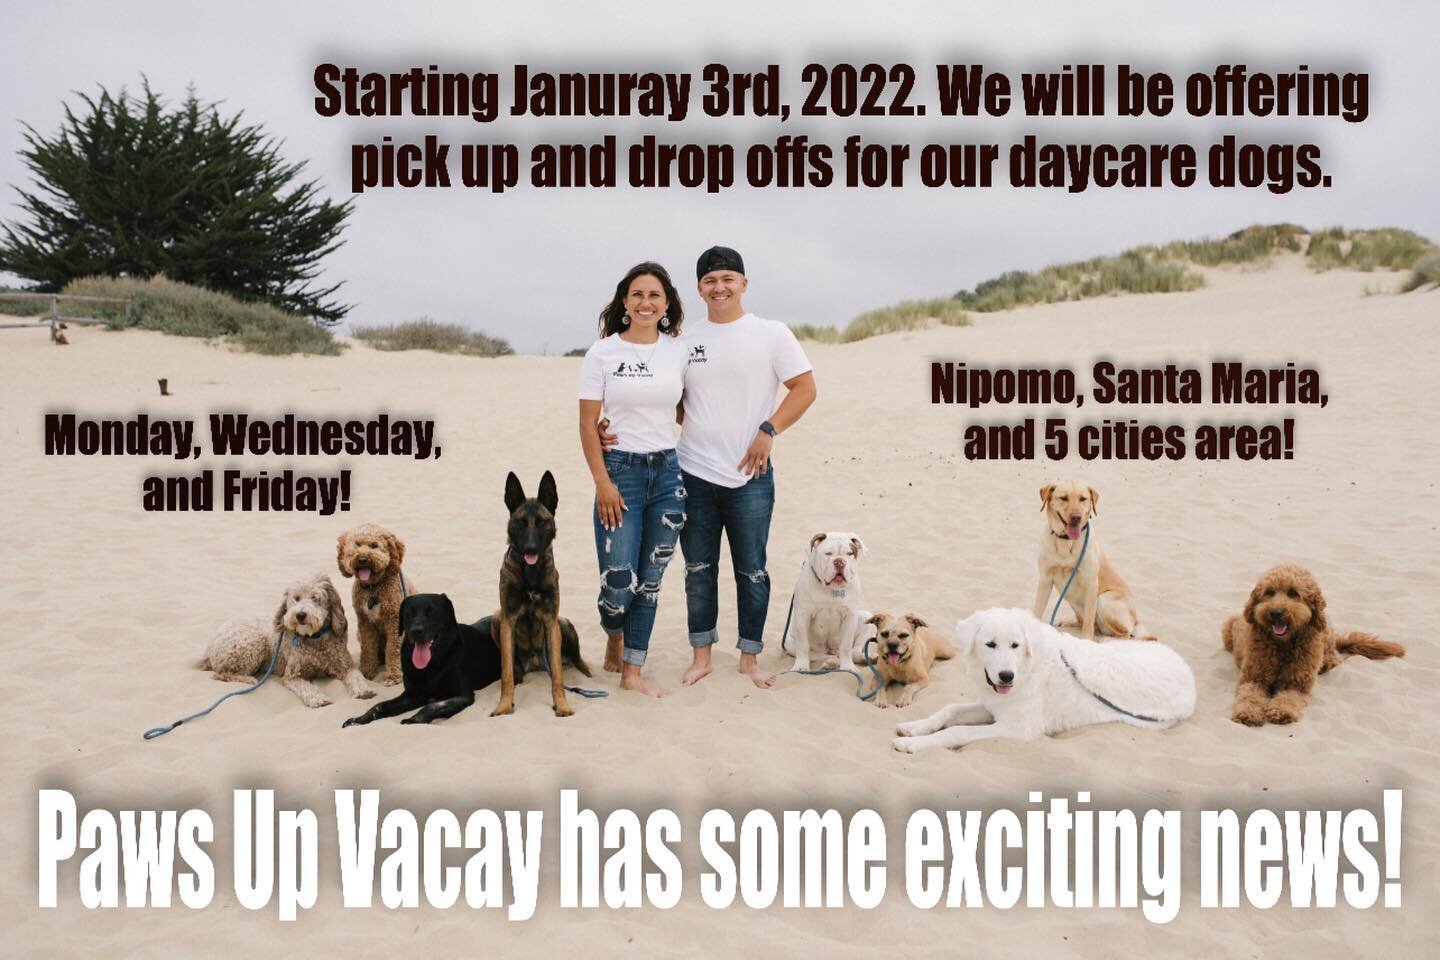 Happy Sunday y&rsquo;all!!! 

Paws Up Vacay has some exciting news, as of January 3rd, 2022 we will be offering pick ups and drop offs for our daycare dogs. 

Daycare is open Monday-Friday. Pick ups/ drop offs will only be available on Mondays, Wedne